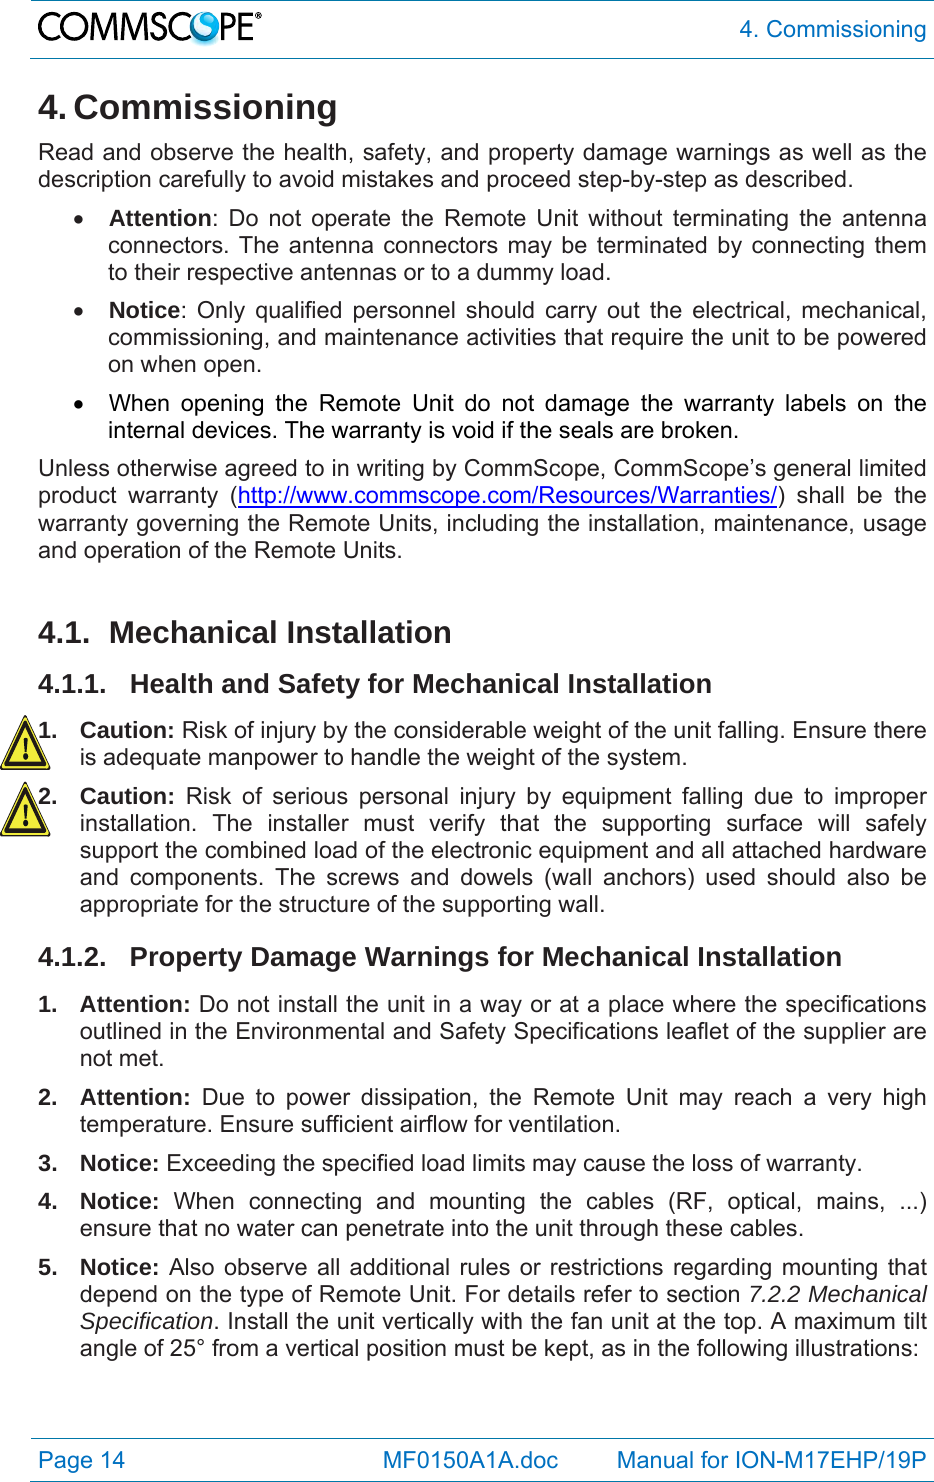  4. Commissioning Page 14            MF0150A1A.doc         Manual for ION-M17EHP/19P 4. Commissioning Read and observe the health, safety, and property damage warnings as well as the description carefully to avoid mistakes and proceed step-by-step as described.  Attention: Do not operate the Remote Unit without terminating the antenna connectors. The antenna connectors may be terminated by connecting them to their respective antennas or to a dummy load.  Notice: Only qualified personnel should carry out the electrical, mechanical, commissioning, and maintenance activities that require the unit to be powered on when open.    When opening the Remote Unit do not damage the warranty labels on the internal devices. The warranty is void if the seals are broken. Unless otherwise agreed to in writing by CommScope, CommScope’s general limited product warranty (http://www.commscope.com/Resources/Warranties/) shall be the warranty governing the Remote Units, including the installation, maintenance, usage and operation of the Remote Units.  4.1. Mechanical Installation 4.1.1. Health and Safety for Mechanical Installation 1. Caution: Risk of injury by the considerable weight of the unit falling. Ensure there is adequate manpower to handle the weight of the system. 2. Caution: Risk of serious personal injury by equipment falling due to improper installation. The installer must verify that the supporting surface will safely support the combined load of the electronic equipment and all attached hardware and components. The screws and dowels (wall anchors) used should also be appropriate for the structure of the supporting wall. 4.1.2.  Property Damage Warnings for Mechanical Installation 1. Attention: Do not install the unit in a way or at a place where the specifications outlined in the Environmental and Safety Specifications leaflet of the supplier are not met. 2. Attention: Due to power dissipation, the Remote Unit may reach a very high temperature. Ensure sufficient airflow for ventilation. 3. Notice: Exceeding the specified load limits may cause the loss of warranty. 4. Notice: When connecting and mounting the cables (RF, optical, mains, ...) ensure that no water can penetrate into the unit through these cables. 5. Notice: Also observe all additional rules or restrictions regarding mounting that depend on the type of Remote Unit. For details refer to section 7.2.2 Mechanical Specification. Install the unit vertically with the fan unit at the top. A maximum tilt angle of 25° from a vertical position must be kept, as in the following illustrations: 